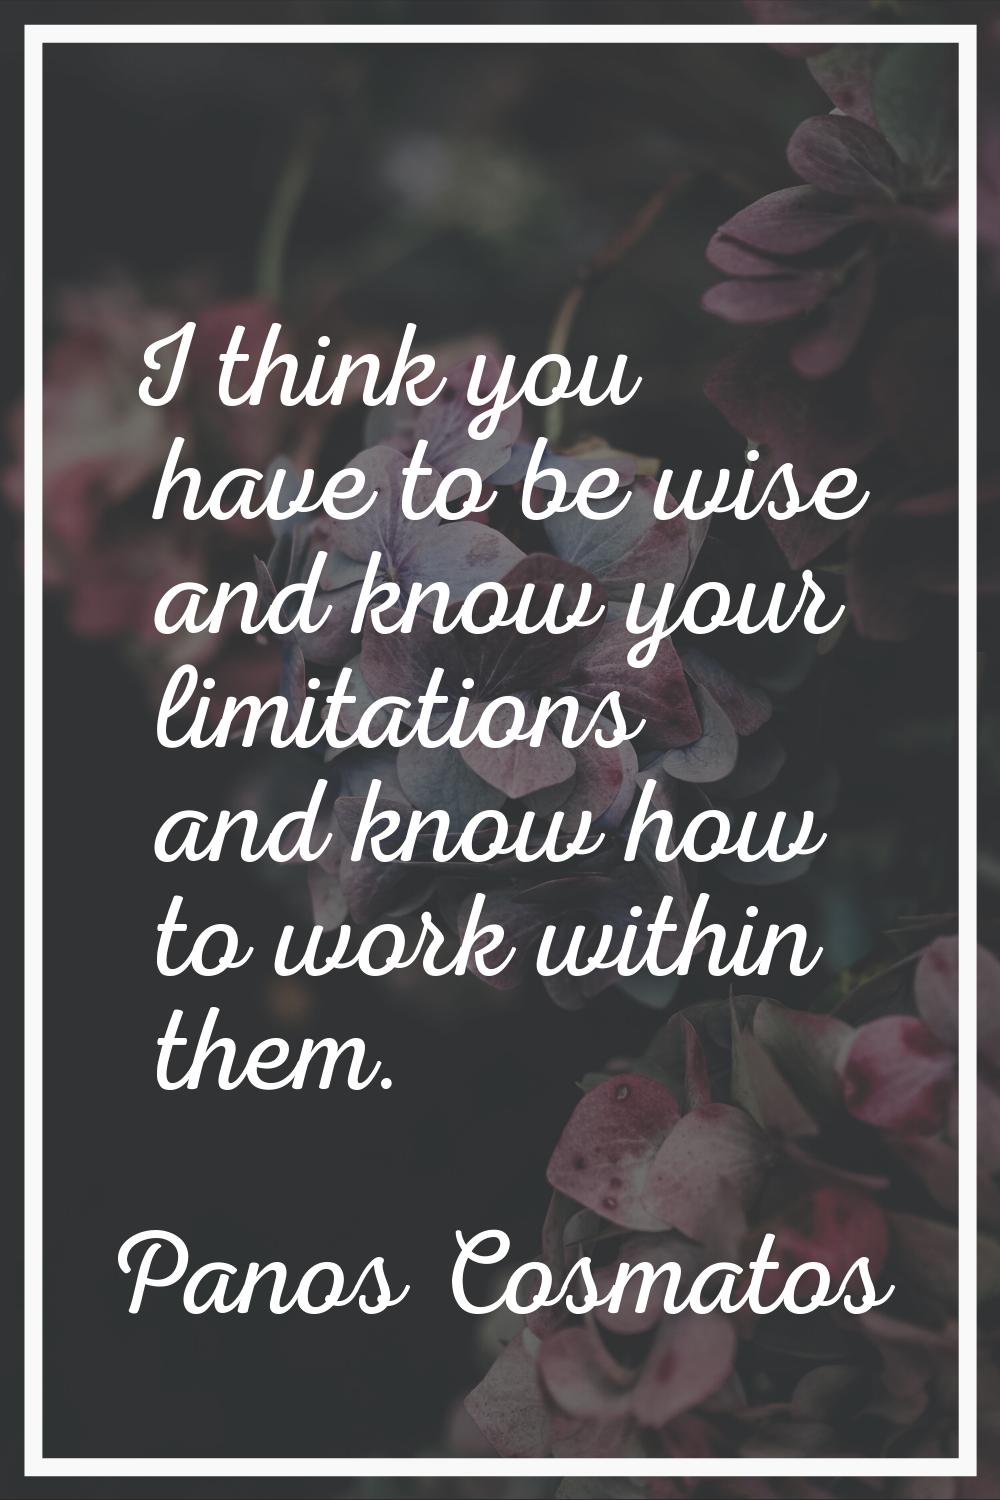 I think you have to be wise and know your limitations and know how to work within them.